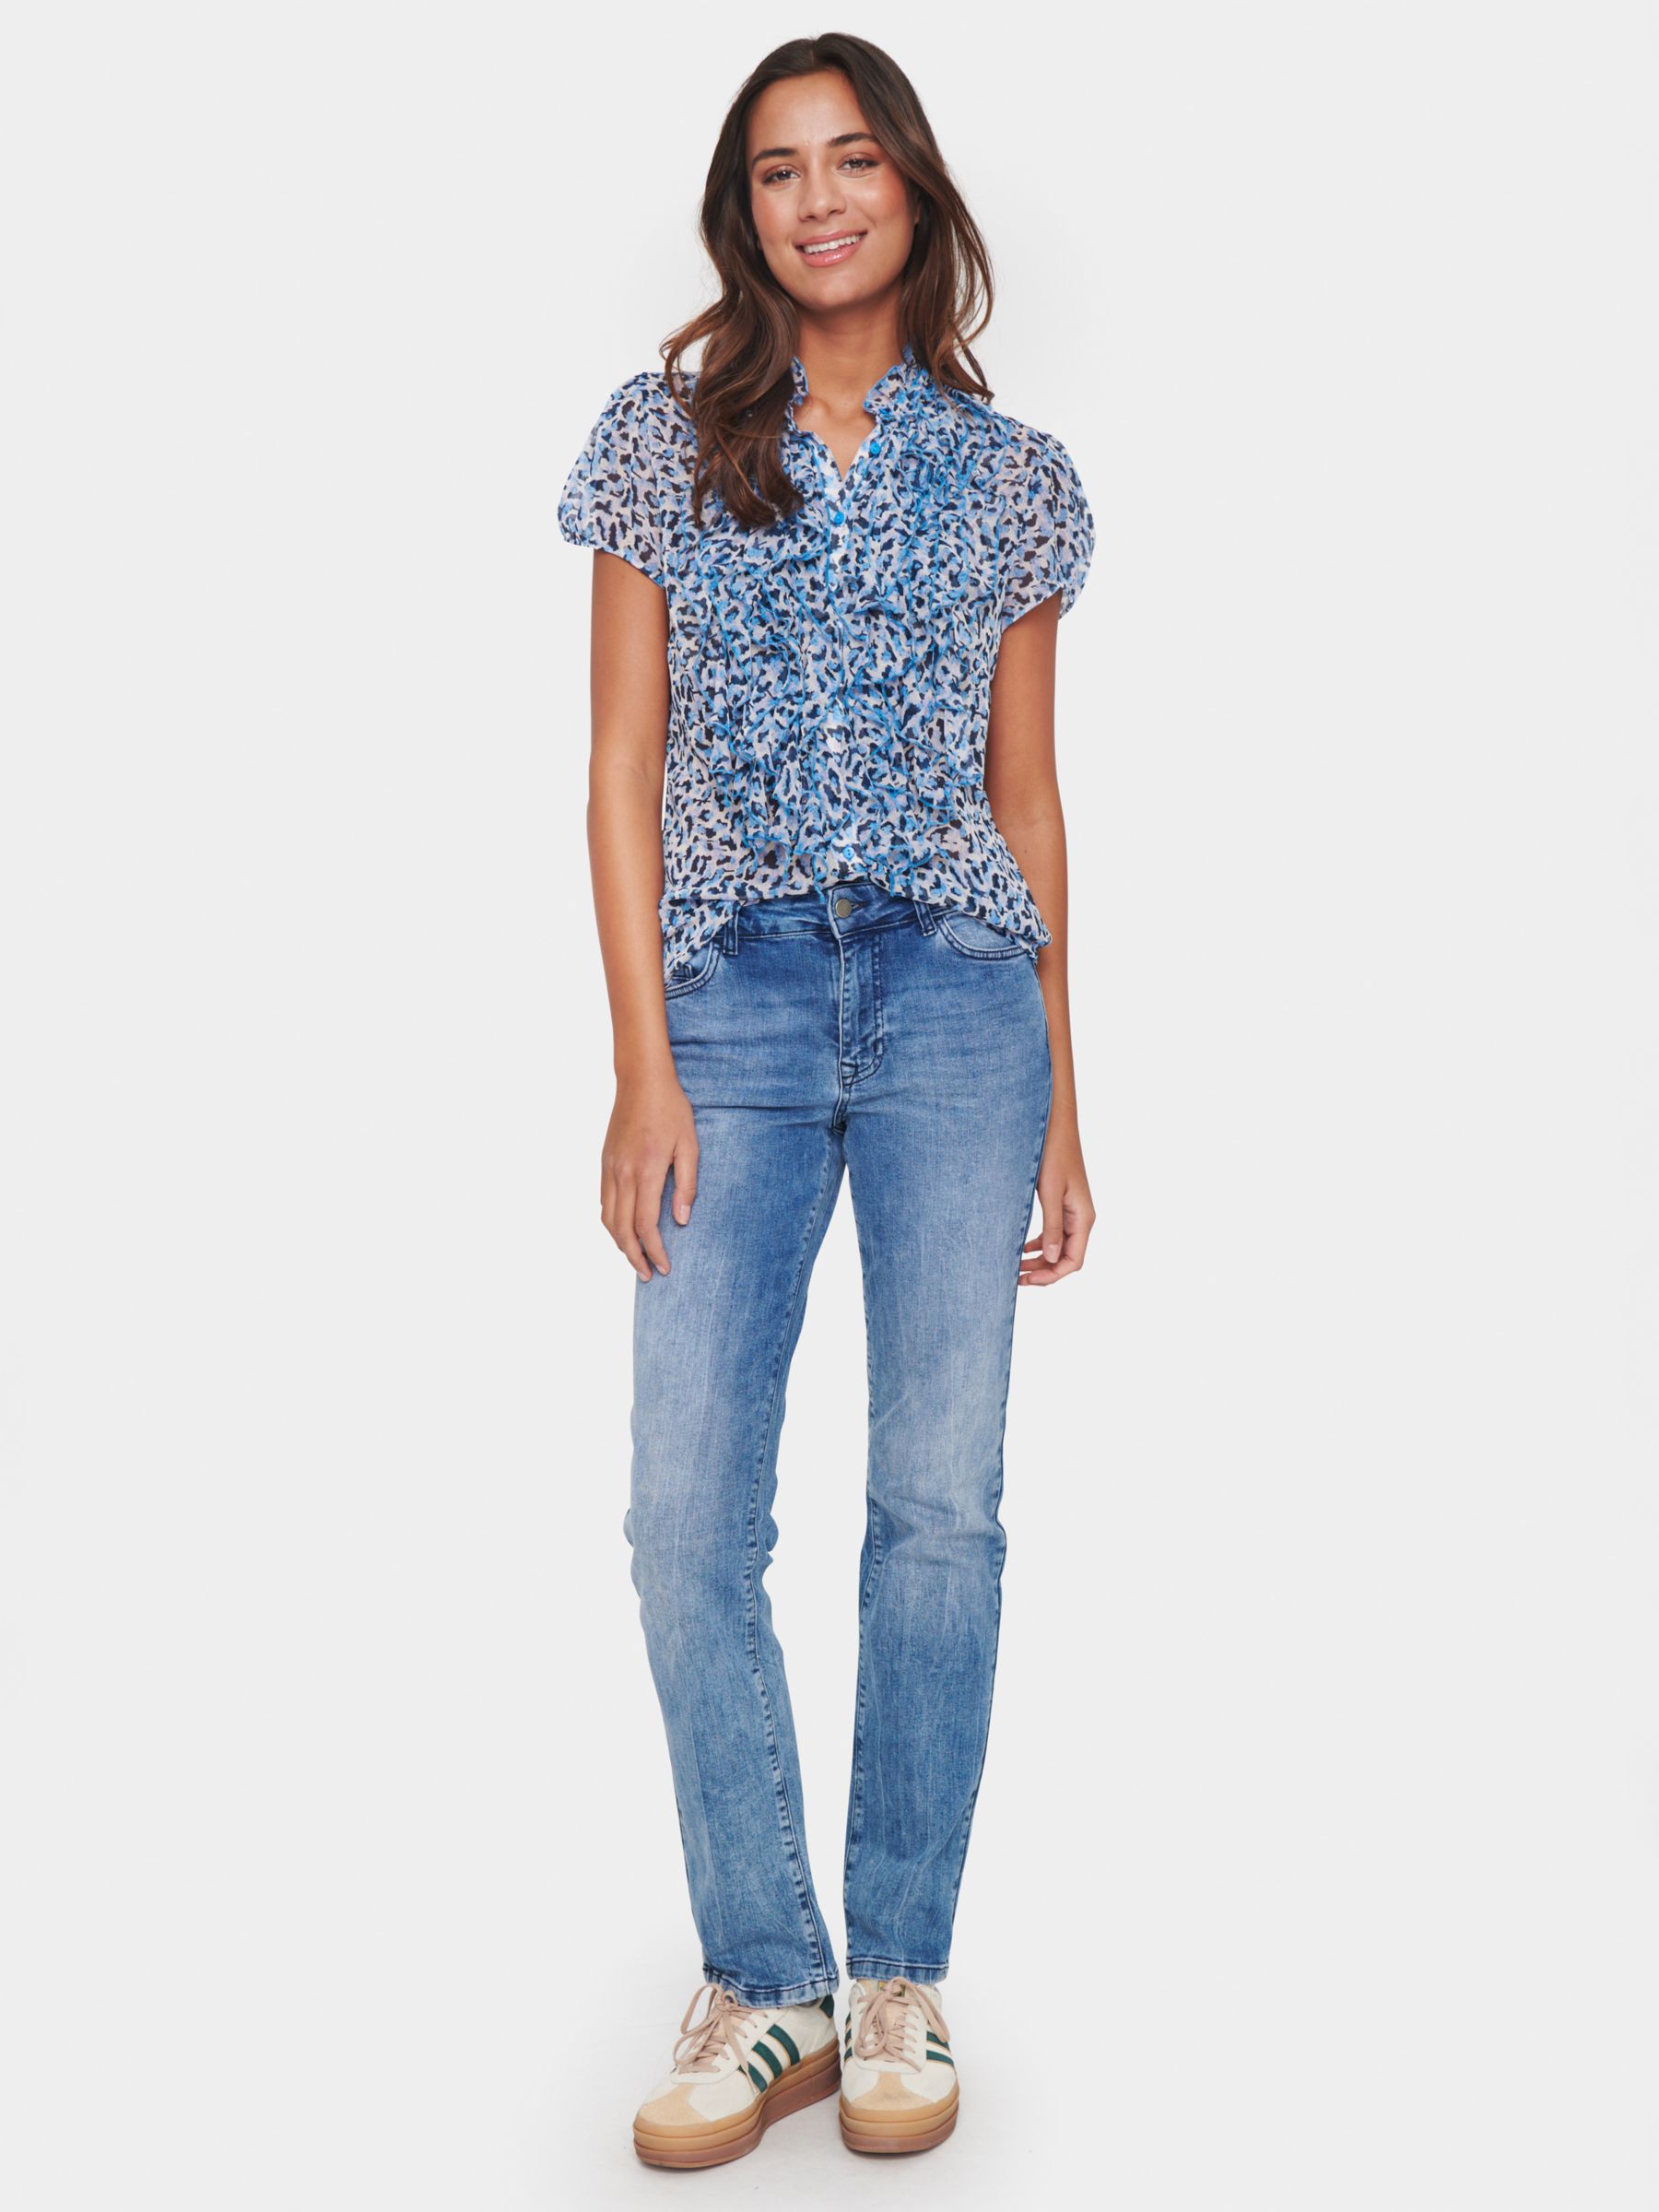 Buy Saint Tropez Lilja Crinkle Abstract Print Blouse, Palace Blue Skyes Online at johnlewis.com